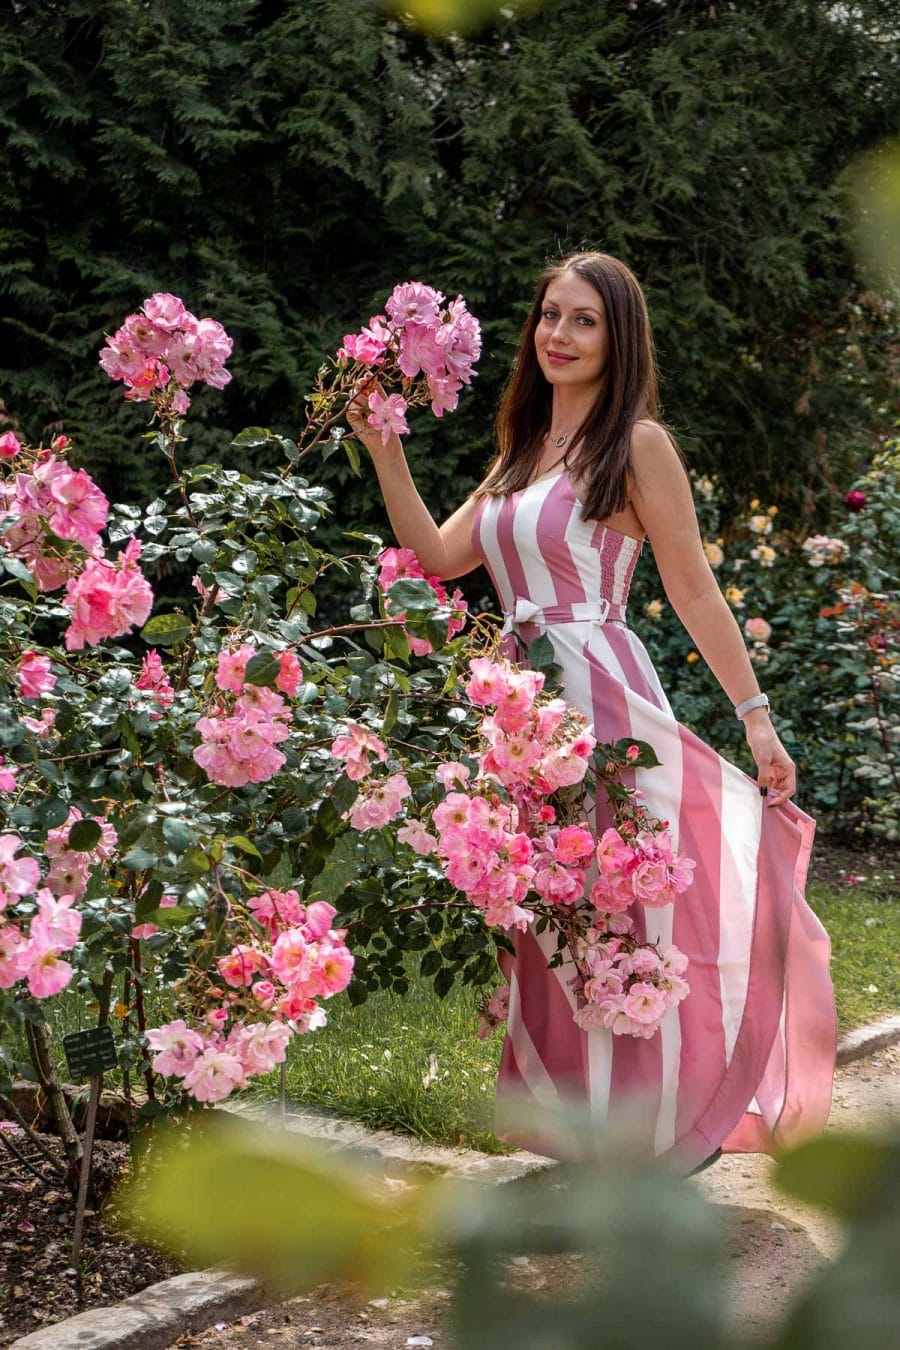 Girl in a pink dress standing in the rose garden at Jardin des Plantes in Paris